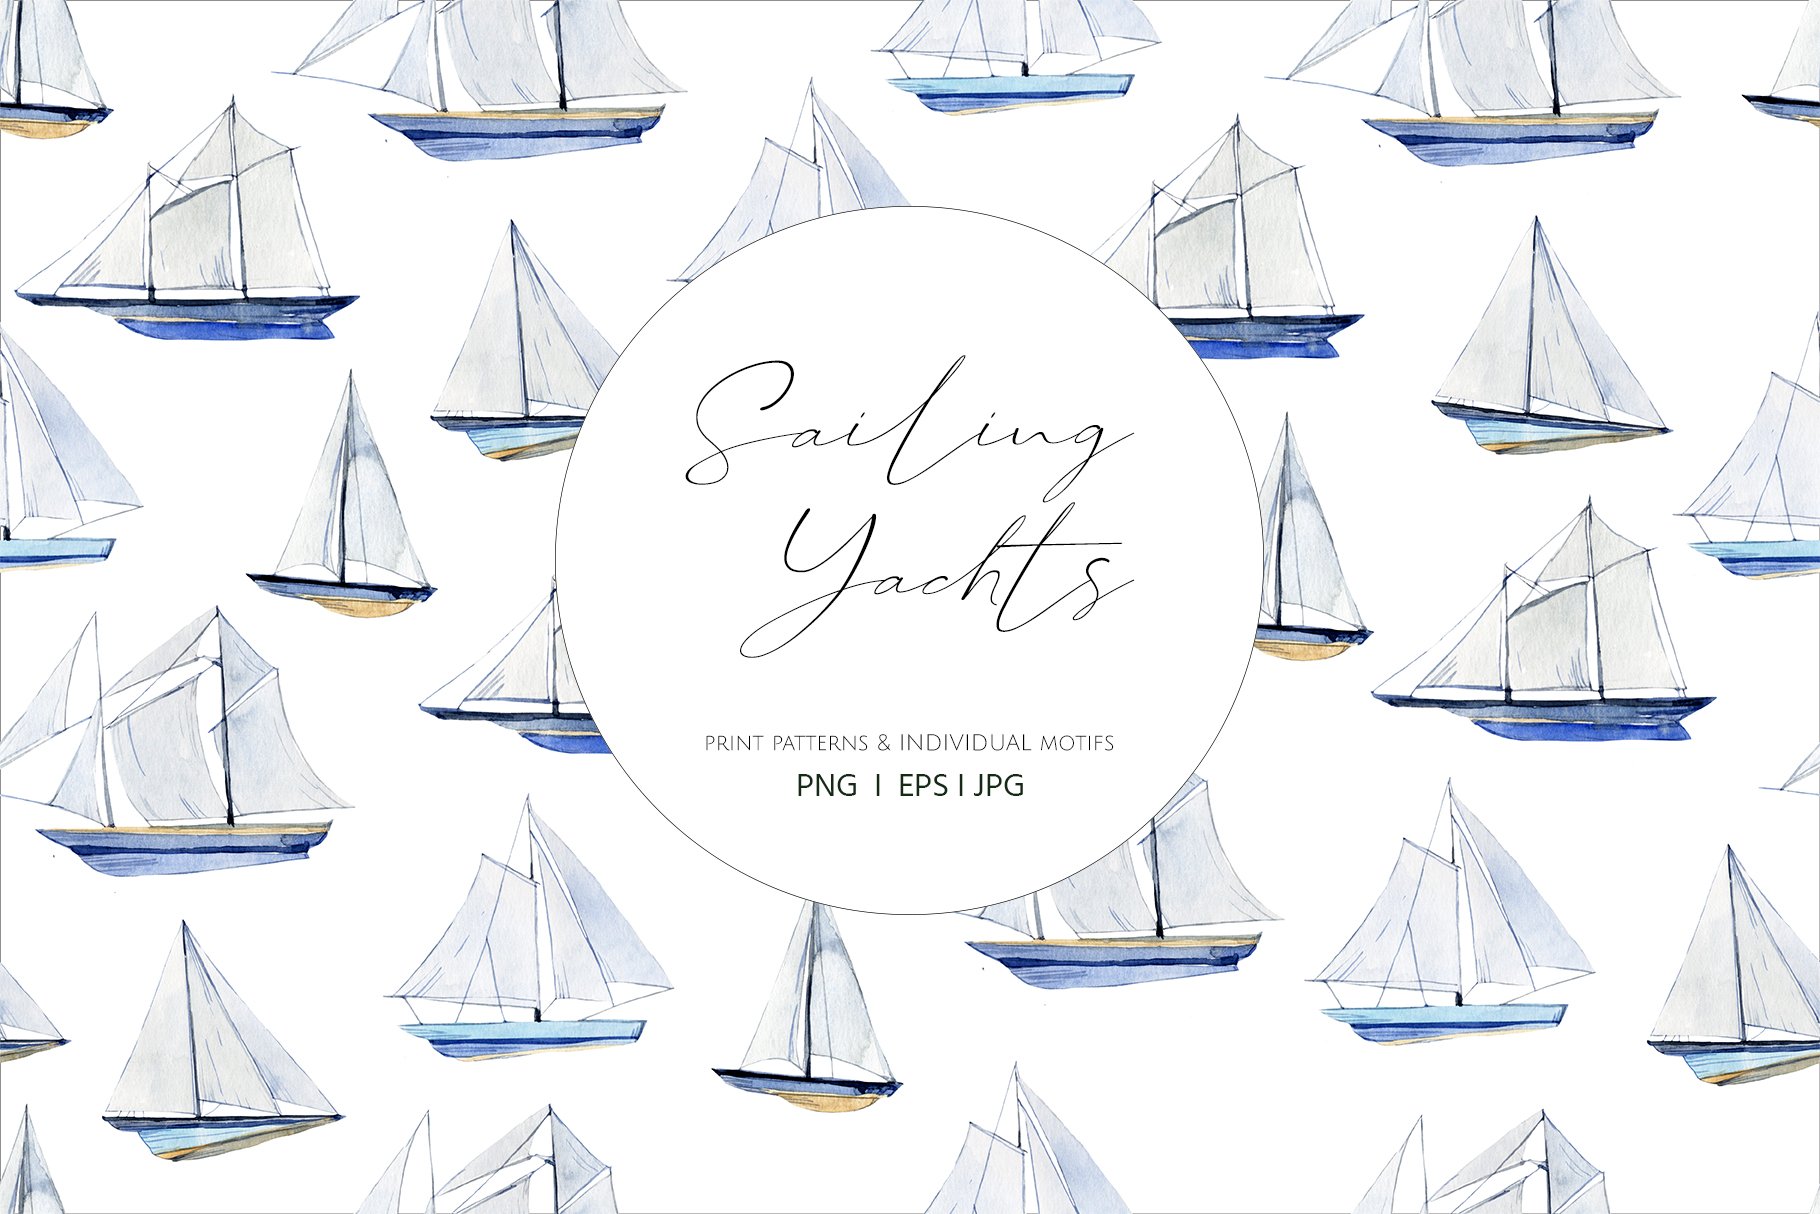 SAILING YACHTS, hand painted Design! cover image.